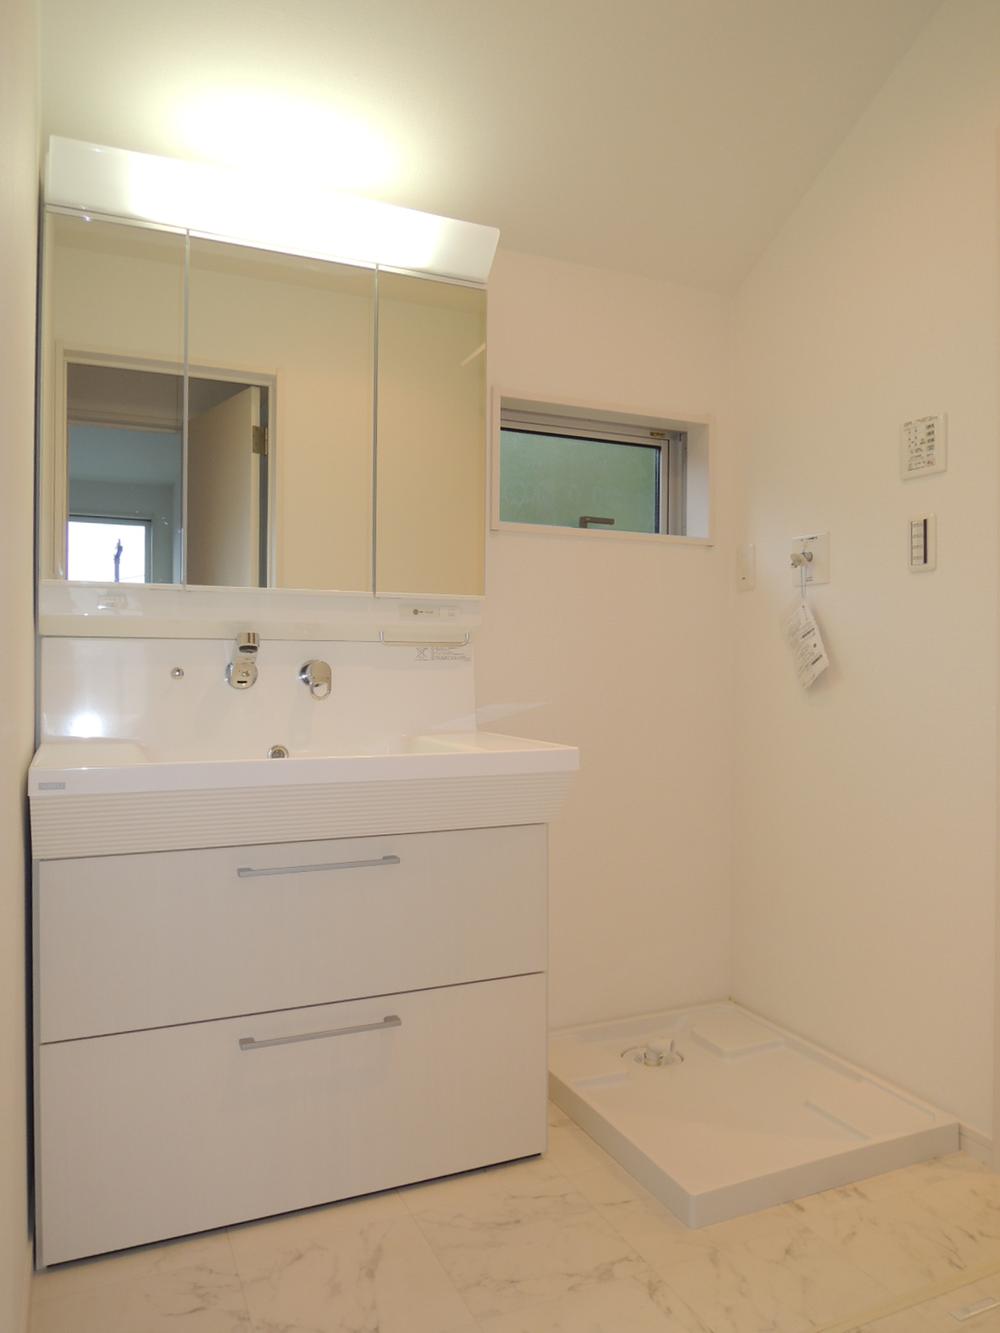 Same specifications photos (Other introspection). Washroom ・ Vanity (same specifications)